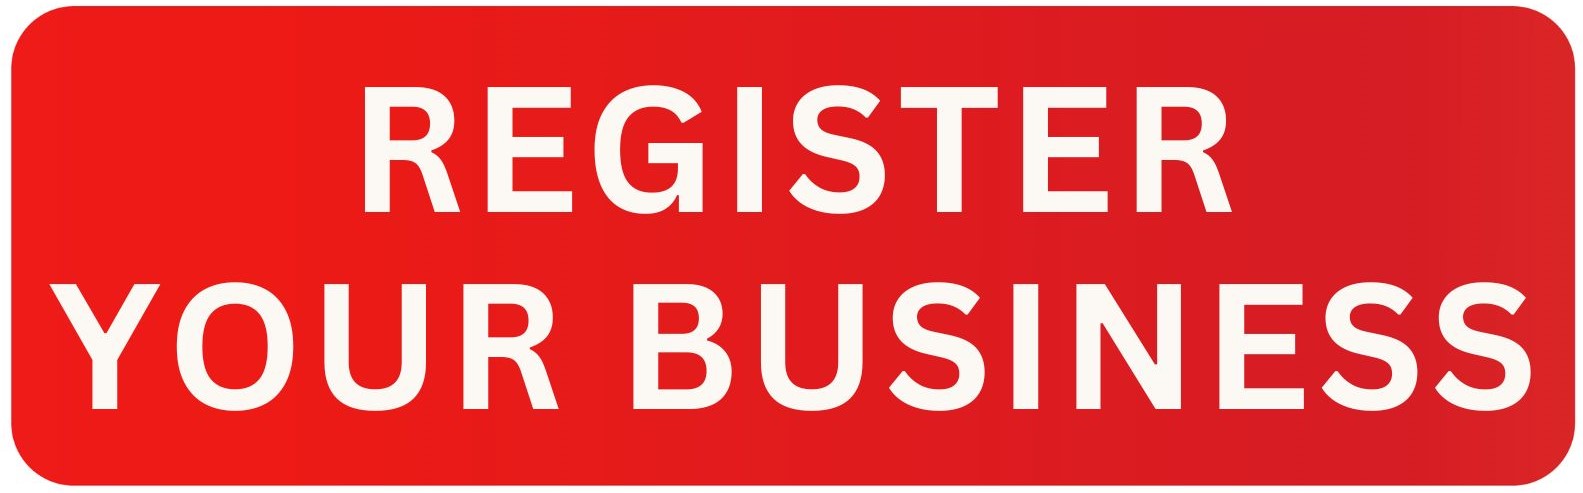 REGISTER YOUR BUSINESS 2